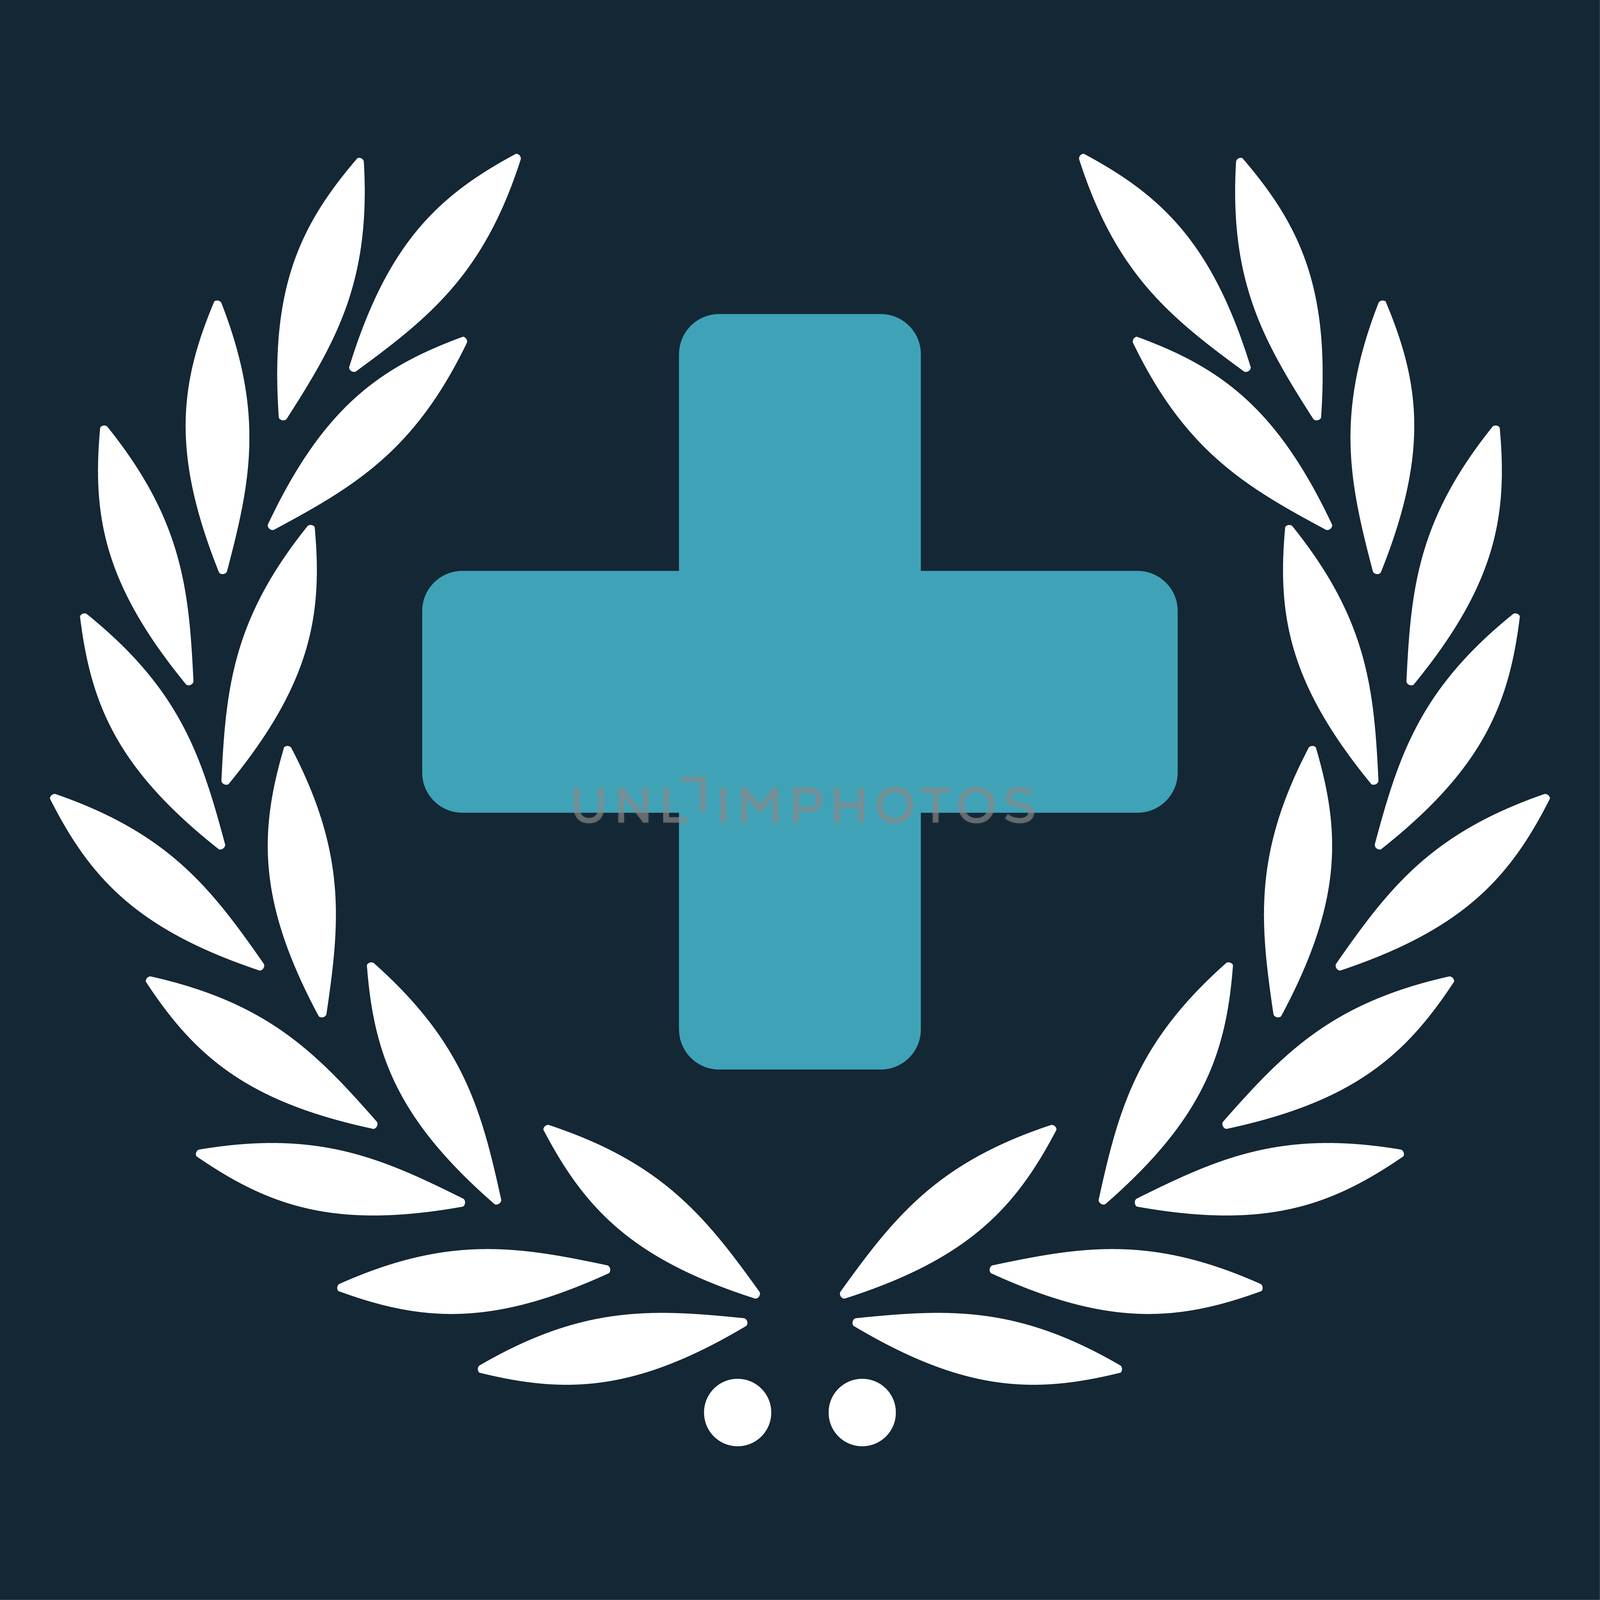 Medical Glory raster icon. Style is bicolor flat symbol, blue and white colors, rounded angles, dark blue background.